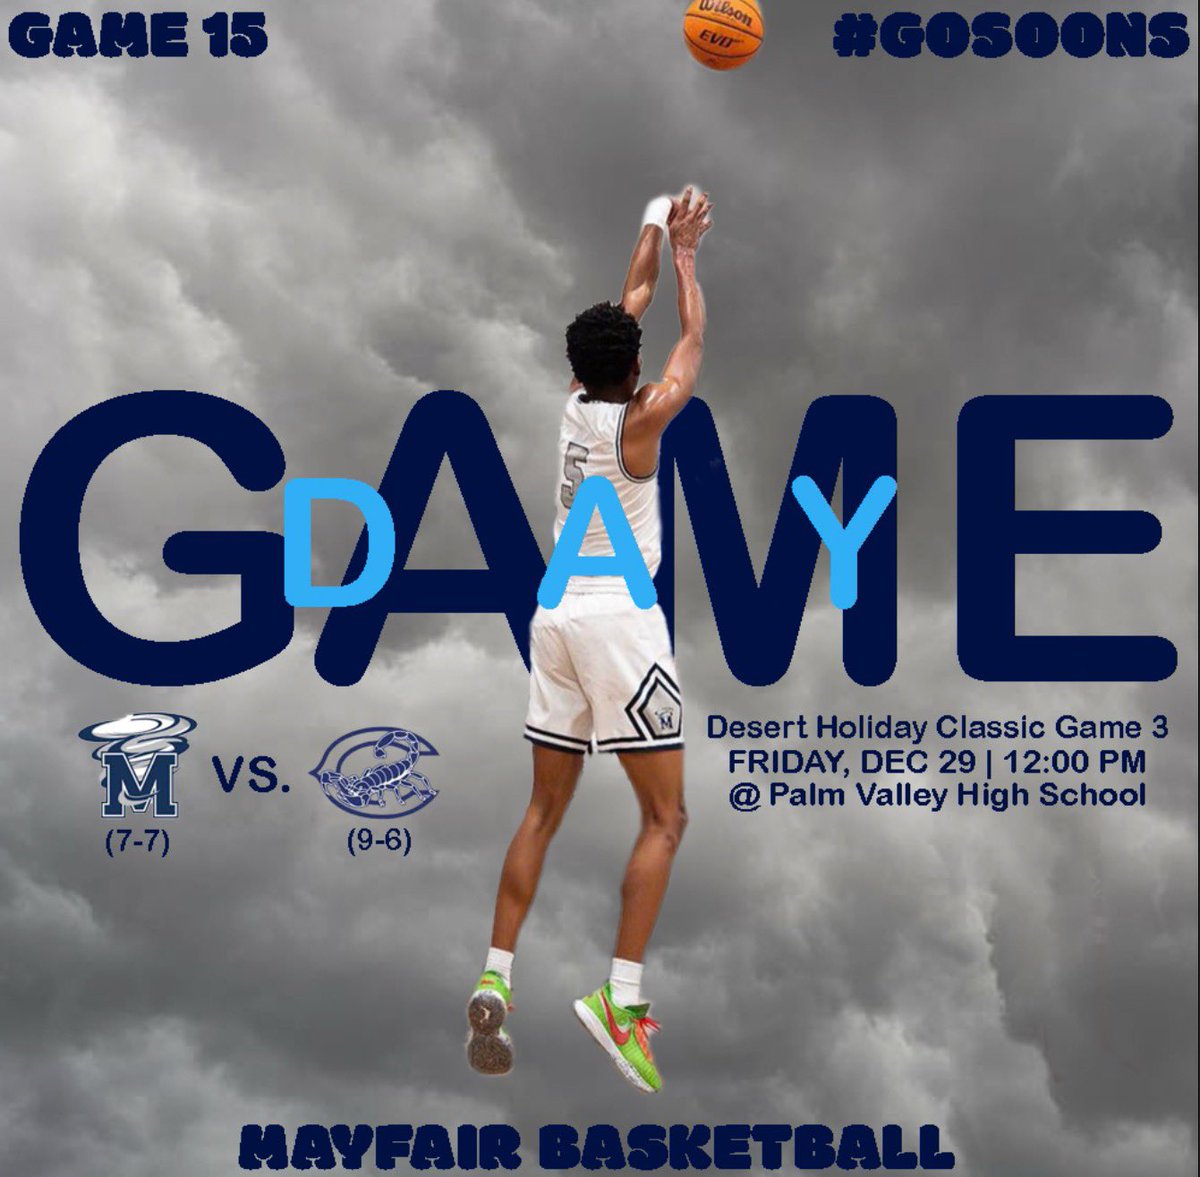 🚨Game Day🚨 🌪️| (7-7) Mayfair Monsoons 🆚| (9-6) Camarillo Scorpions 🏜️| Desert Holiday Classic 📍| Palm Valley High School ⌚️| 12:00 #GoSoons🌪️